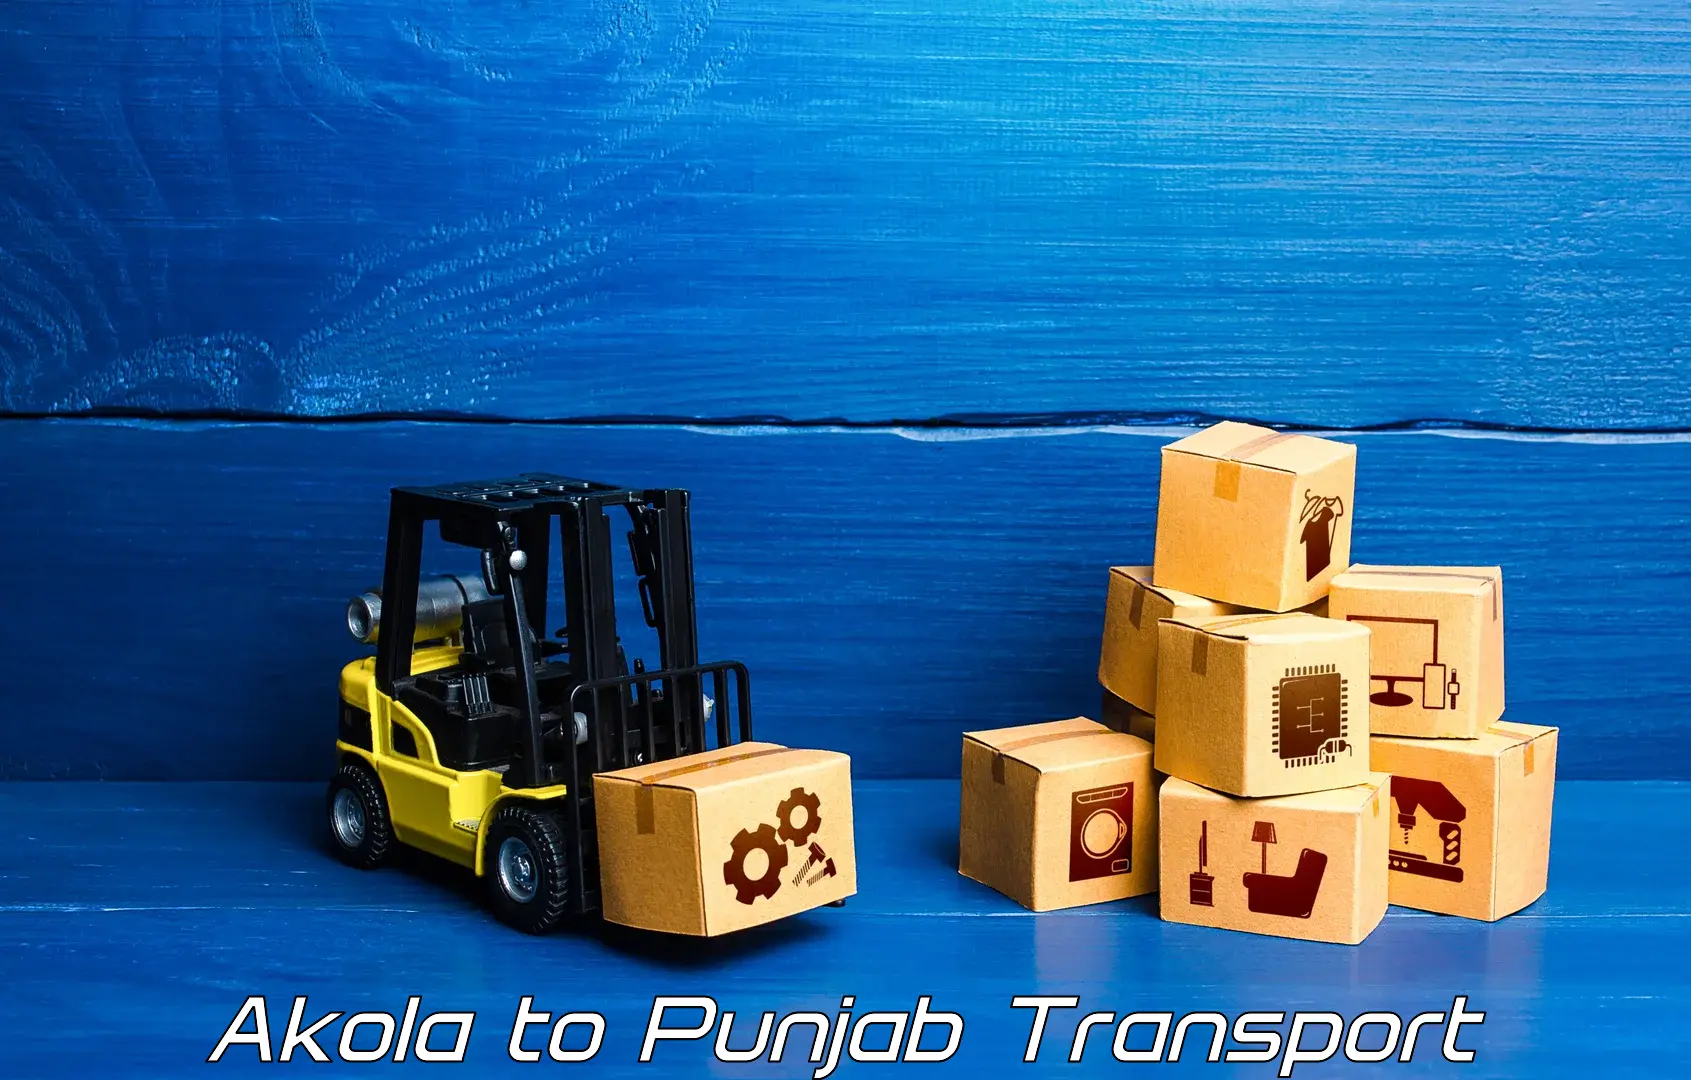 Lorry transport service Akola to Sultanpur Lodhi